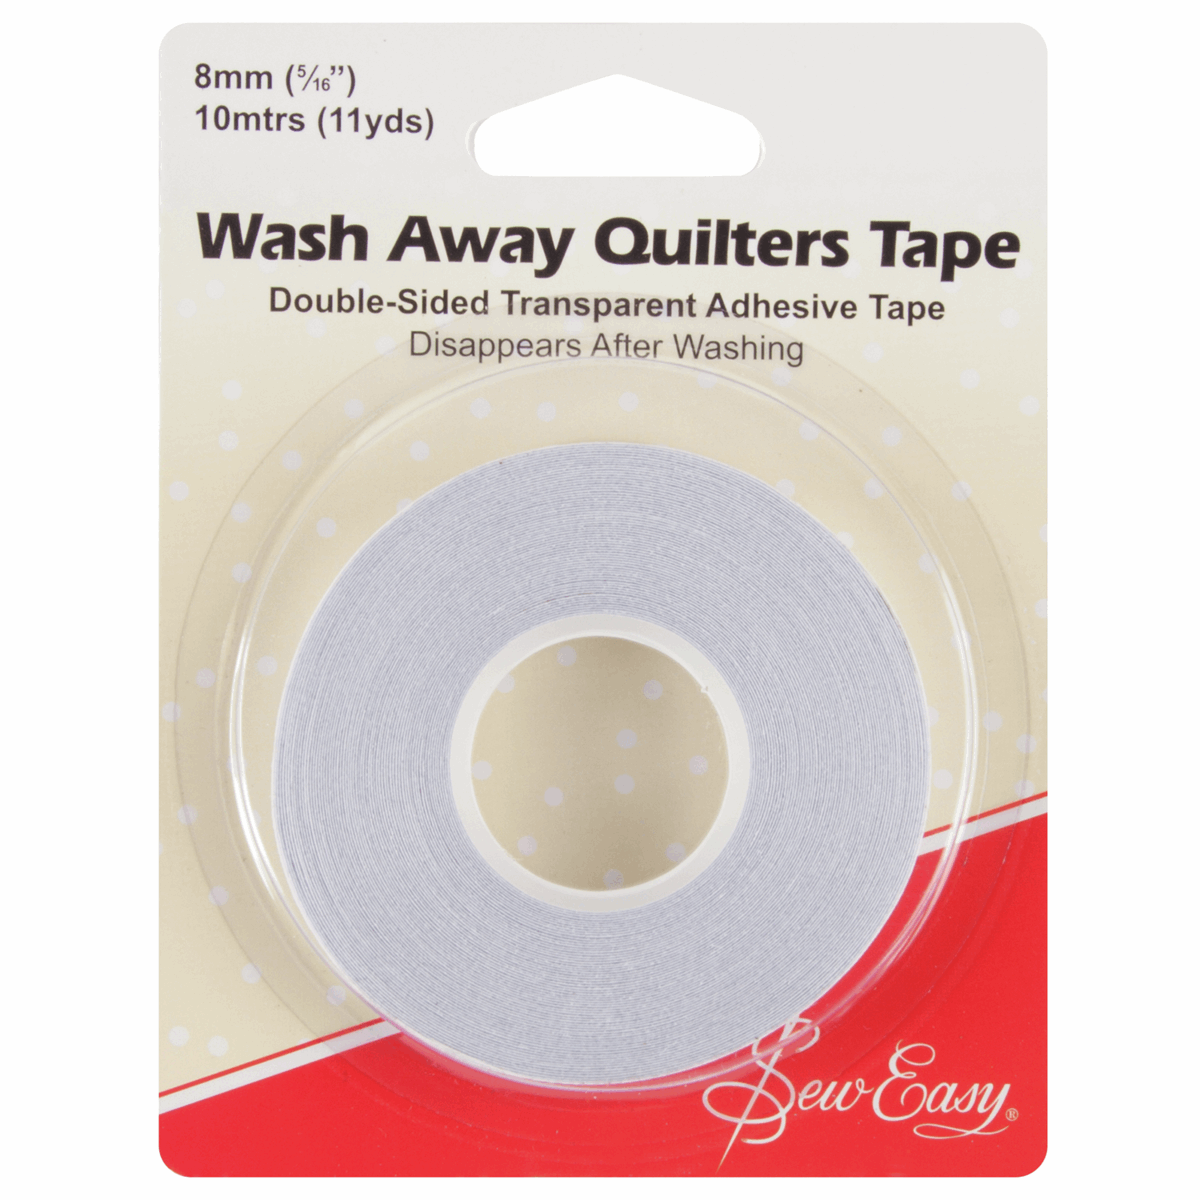 Wash Away Quilters Tape by Sew Easy - 8mm ER787